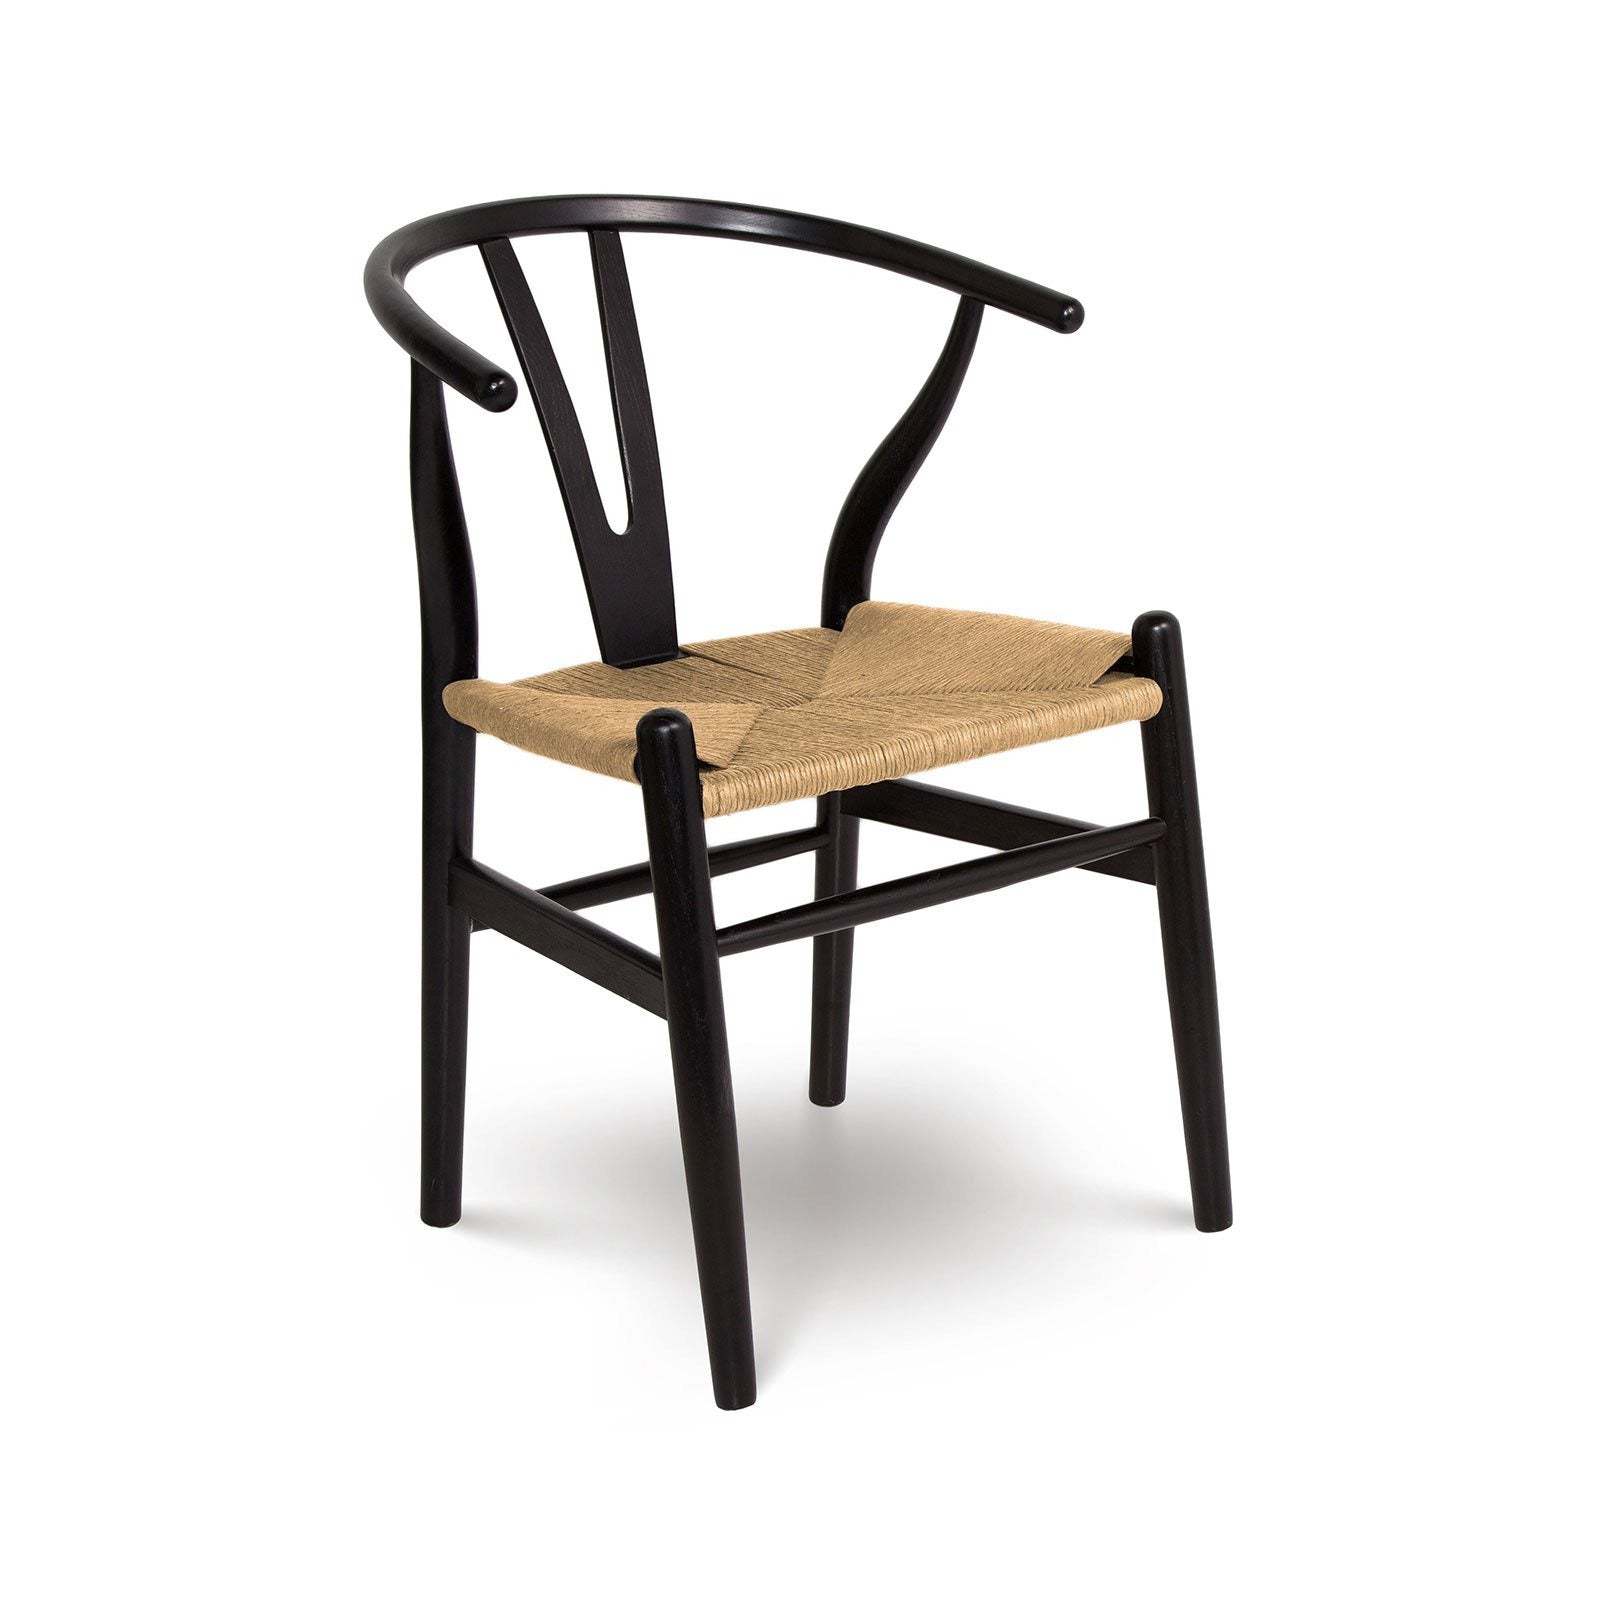 Layla Dining Chair - Black Natural